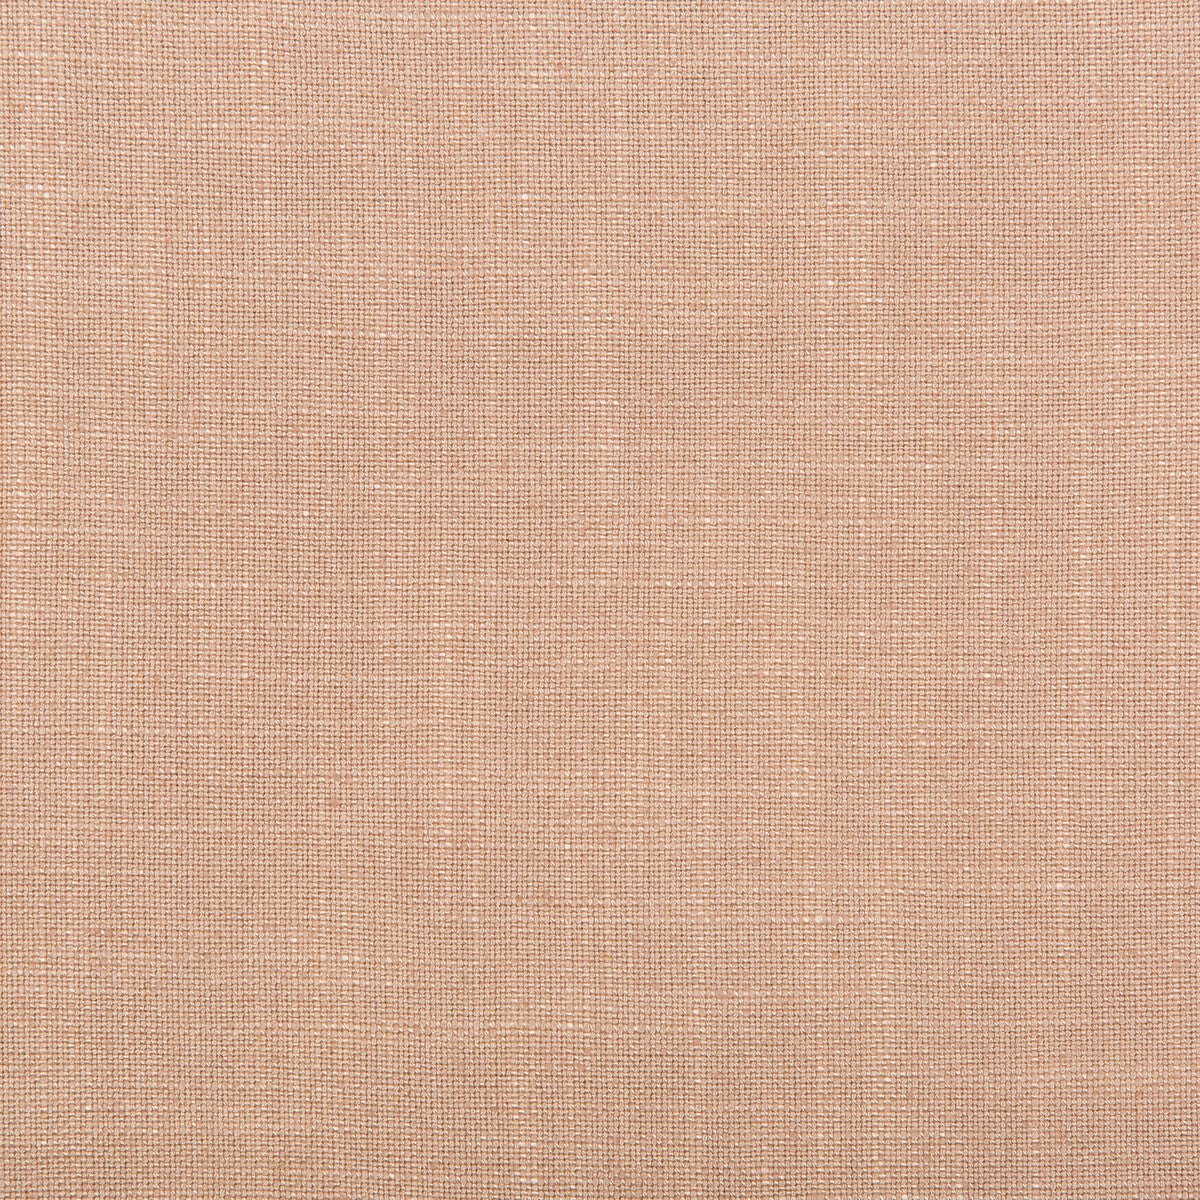 Aura fabric in nude color - pattern 35520.717.0 - by Kravet Design